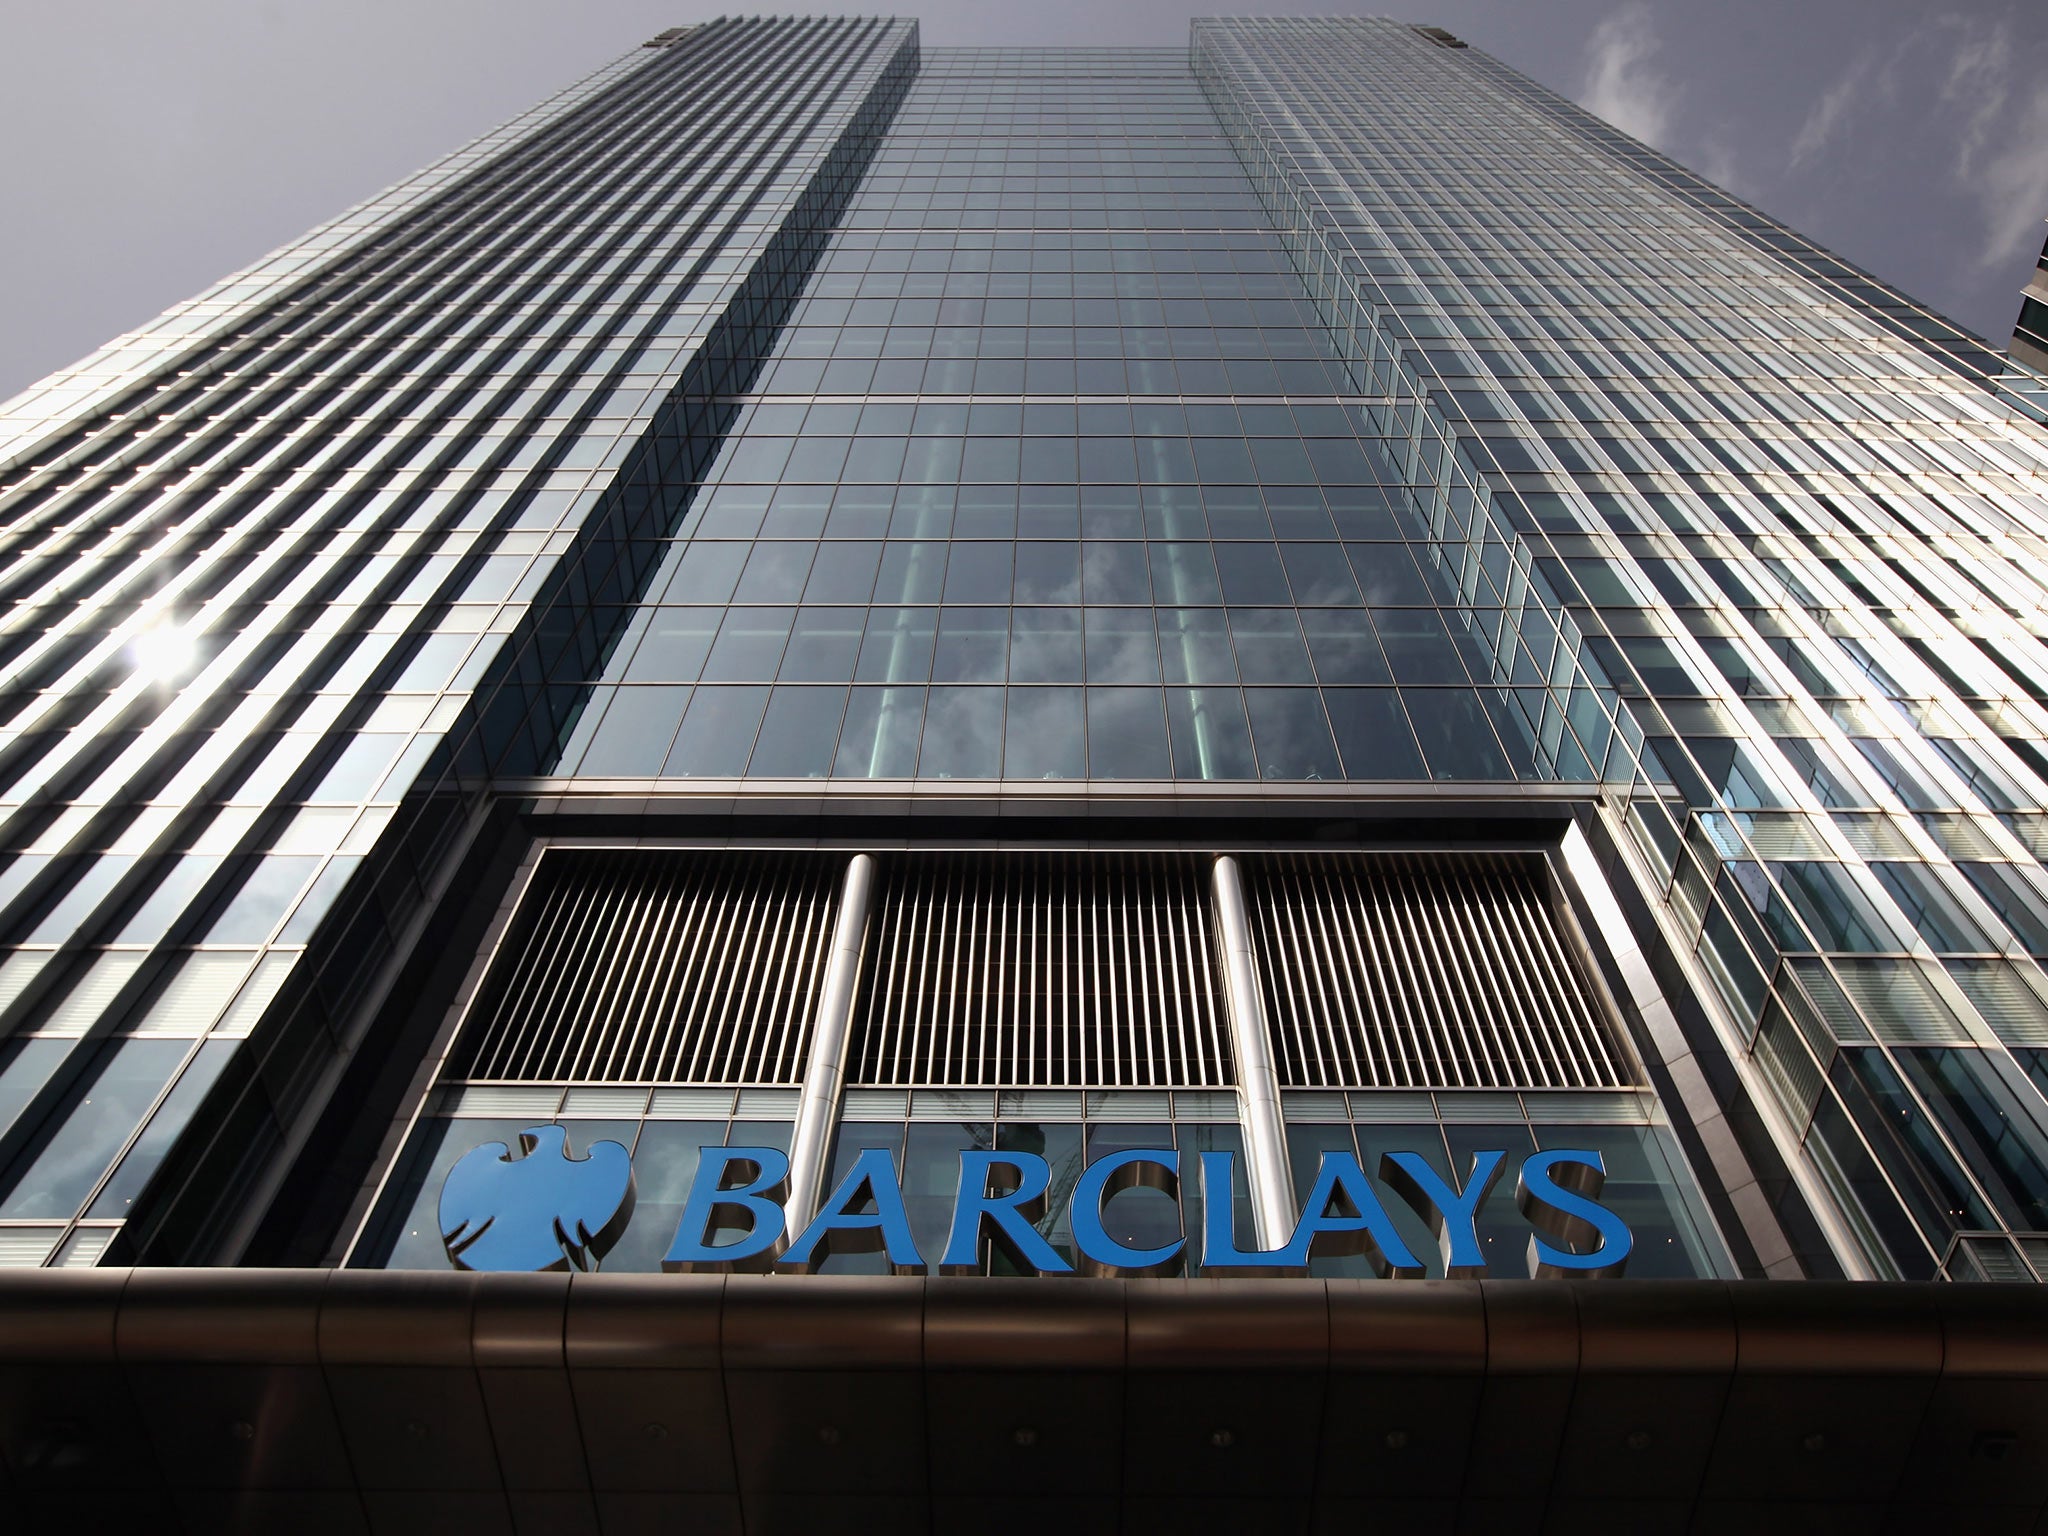 Barclays has fought back over allegations of fraud